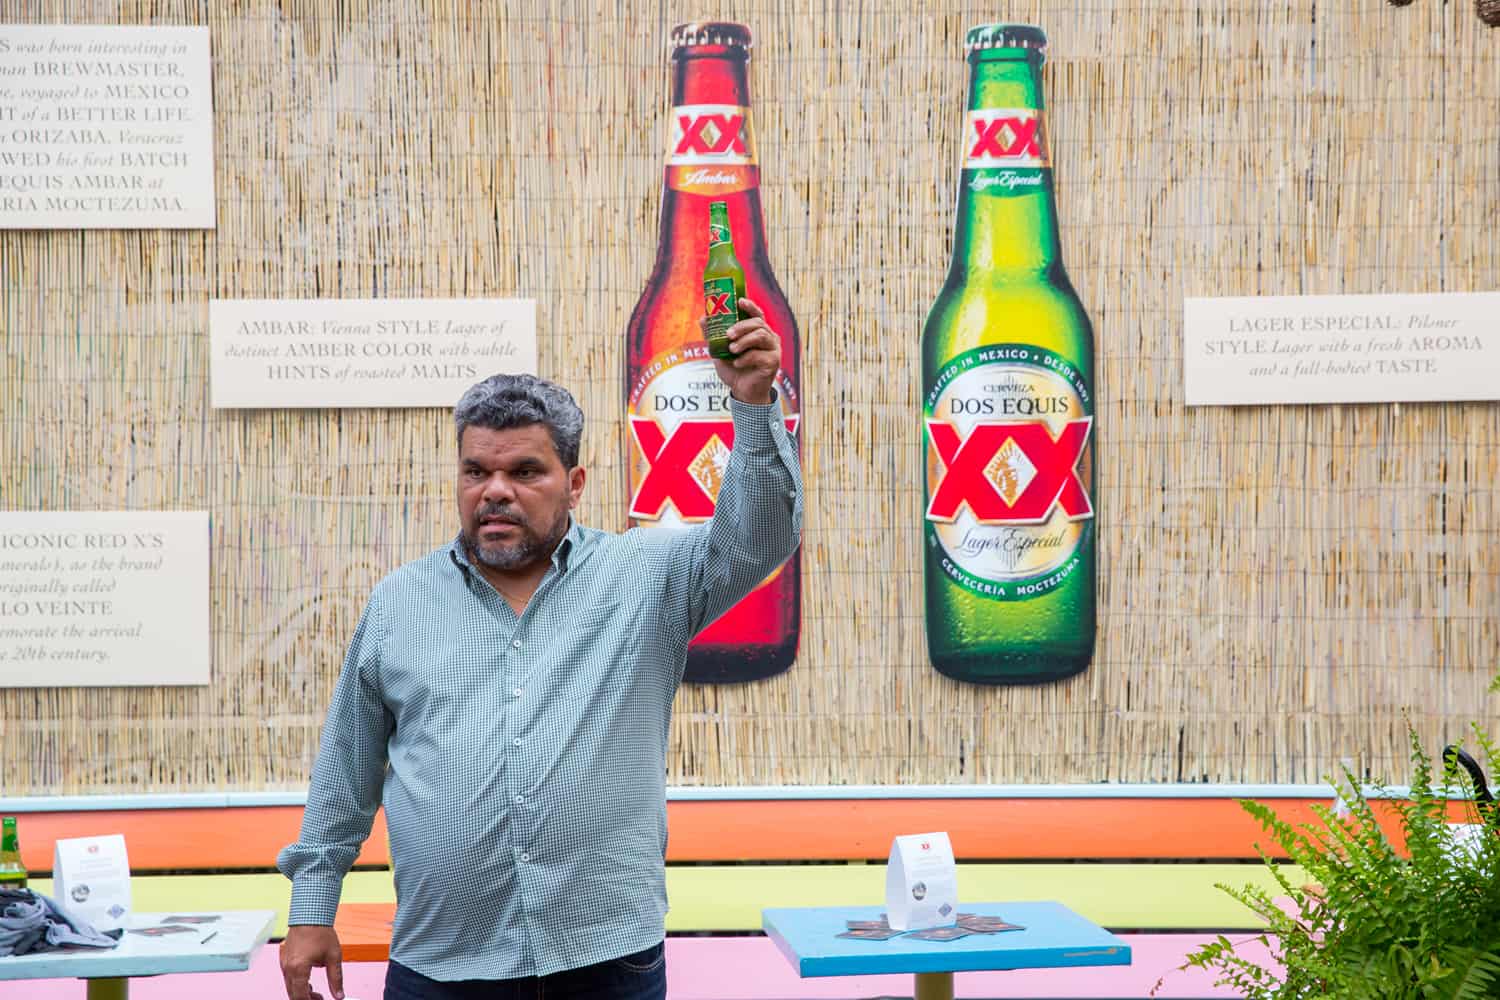 Does Equis spokesman Luis Guzman holding beer in Most Interesting Person Index